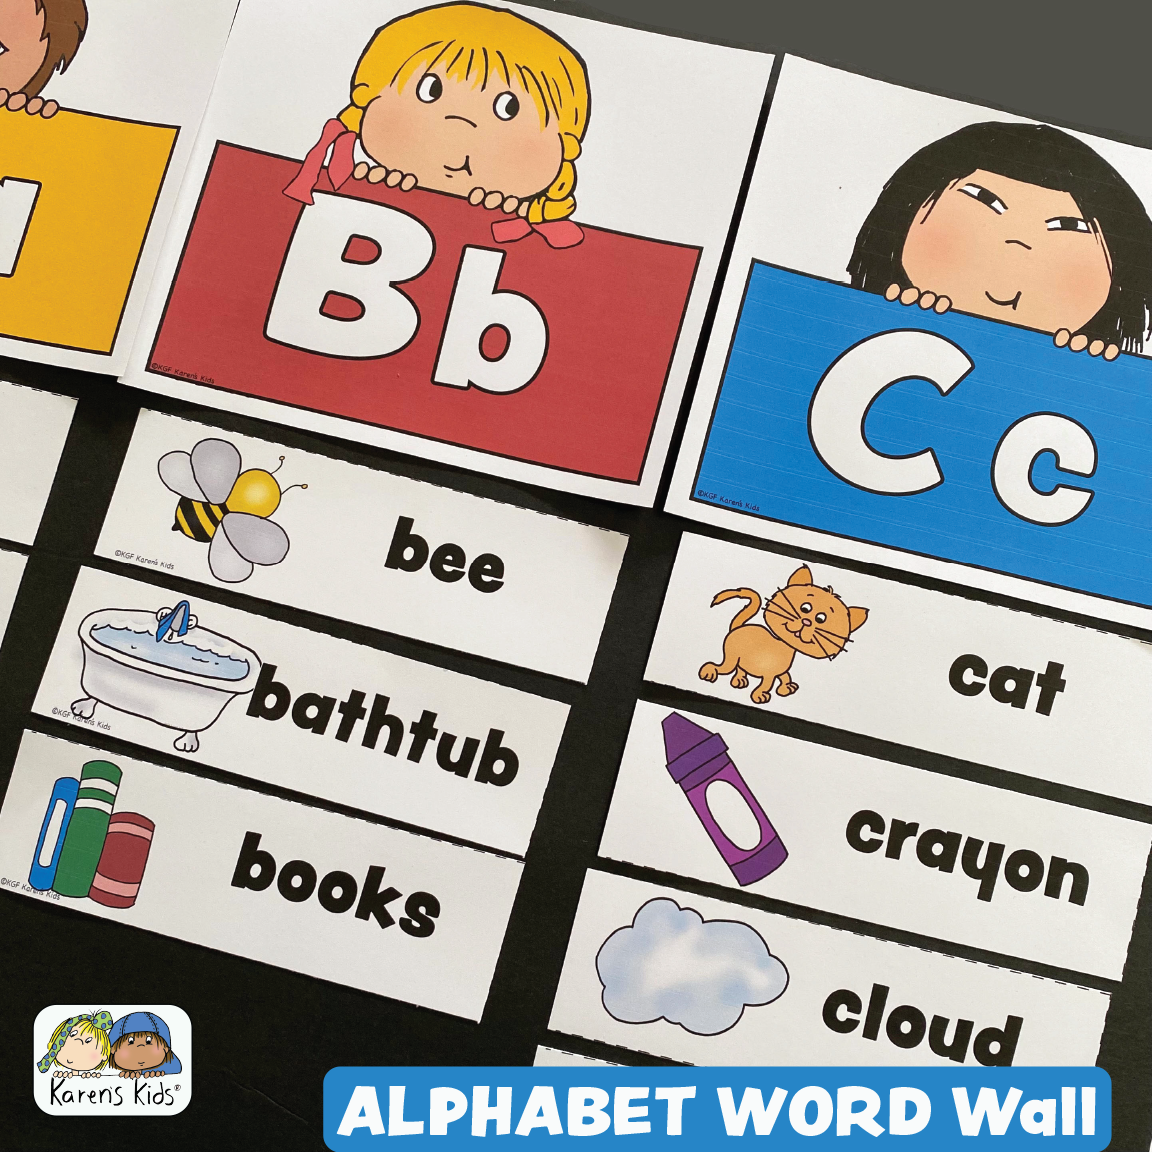 Close up colorful picture of a girl holding a Bb card with 3 picture-word cards beneath it, bee, bathtub, books. A boy holds Cc with 3 picture-word cards beneath, cat, crayon, cloud.